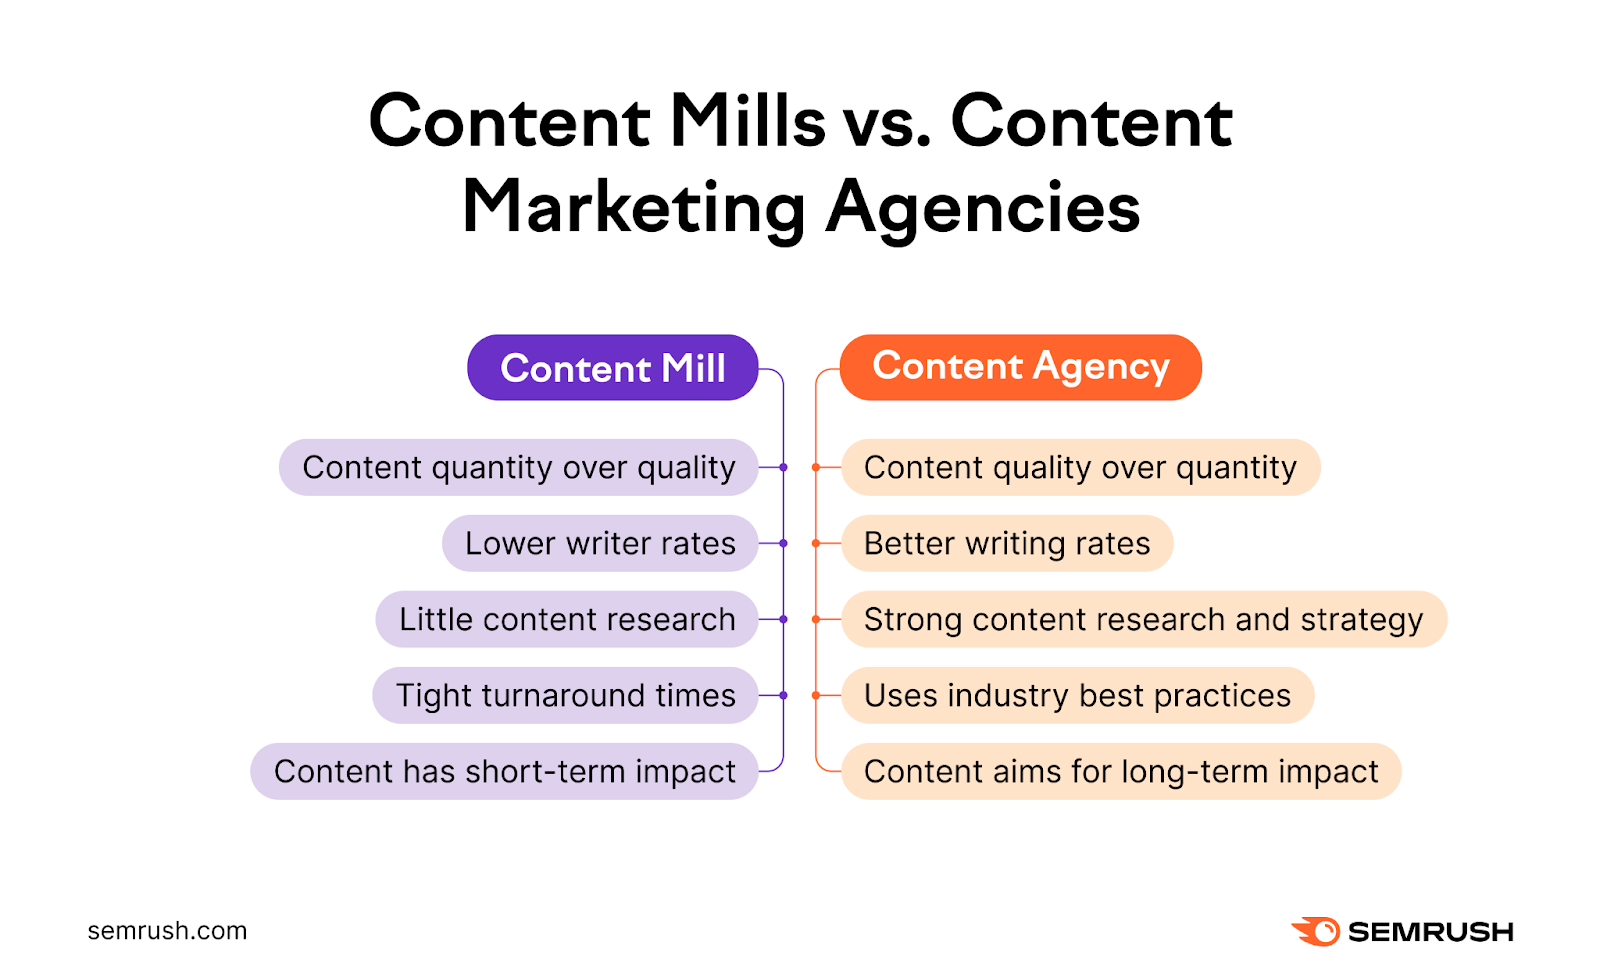 Content mills vs content marketing agencies. Content mills: content quantity over quality, lower writer rates, little content research, tight turnaround times, short-term impact. Agency: content quality, better writing rates, strong content research, industry best practices, long-term impact.